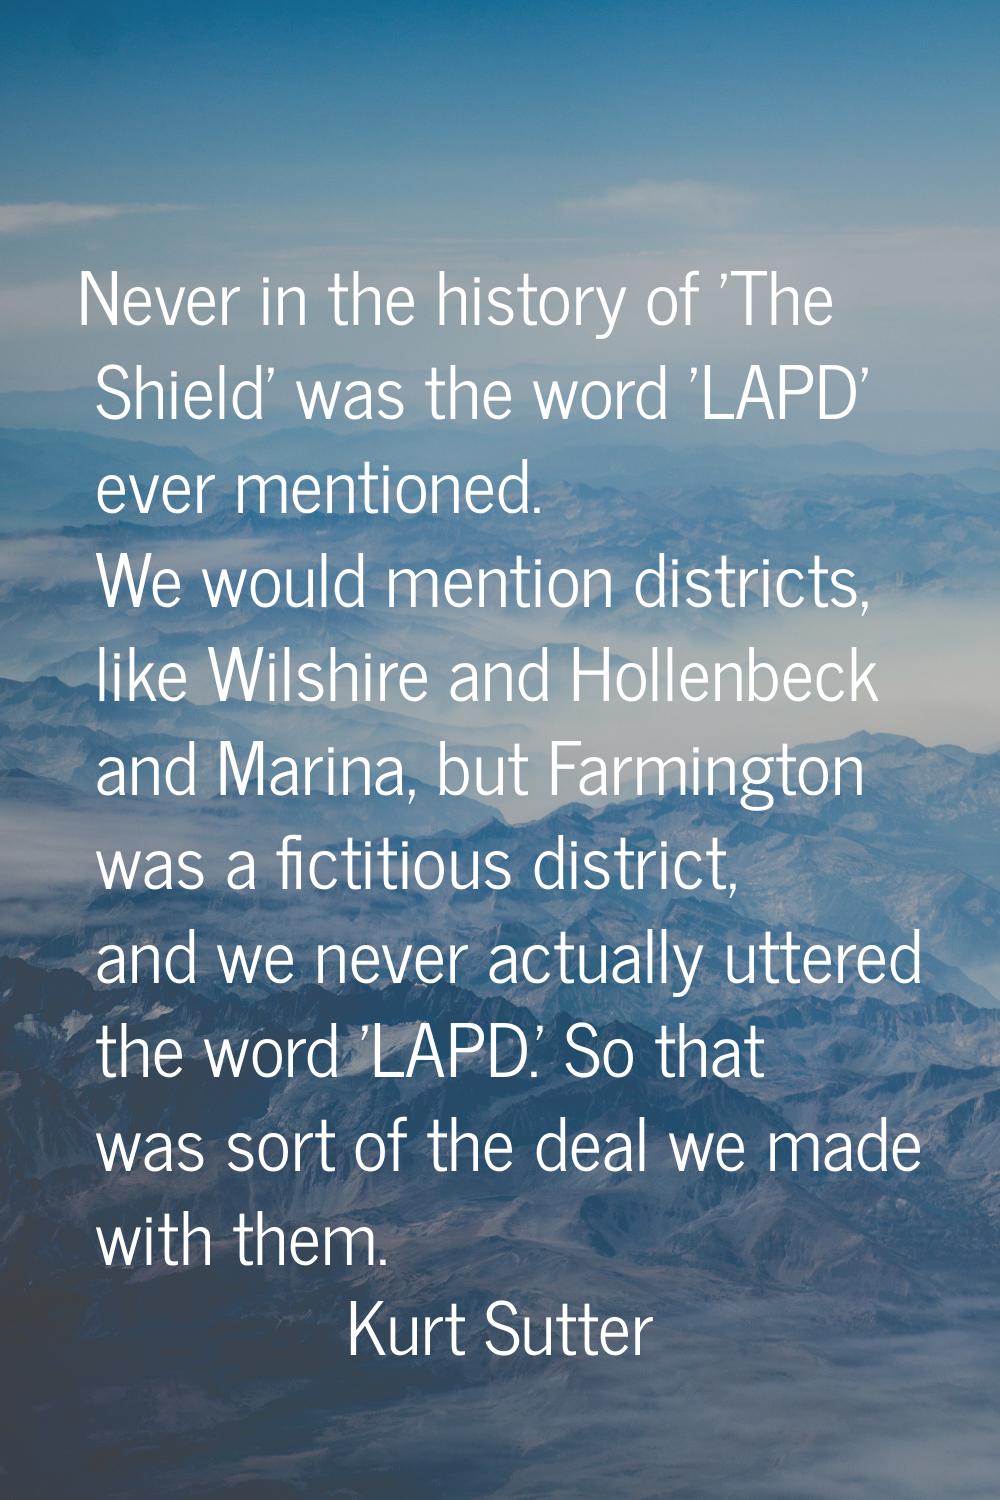 Never in the history of 'The Shield' was the word 'LAPD' ever mentioned. We would mention districts